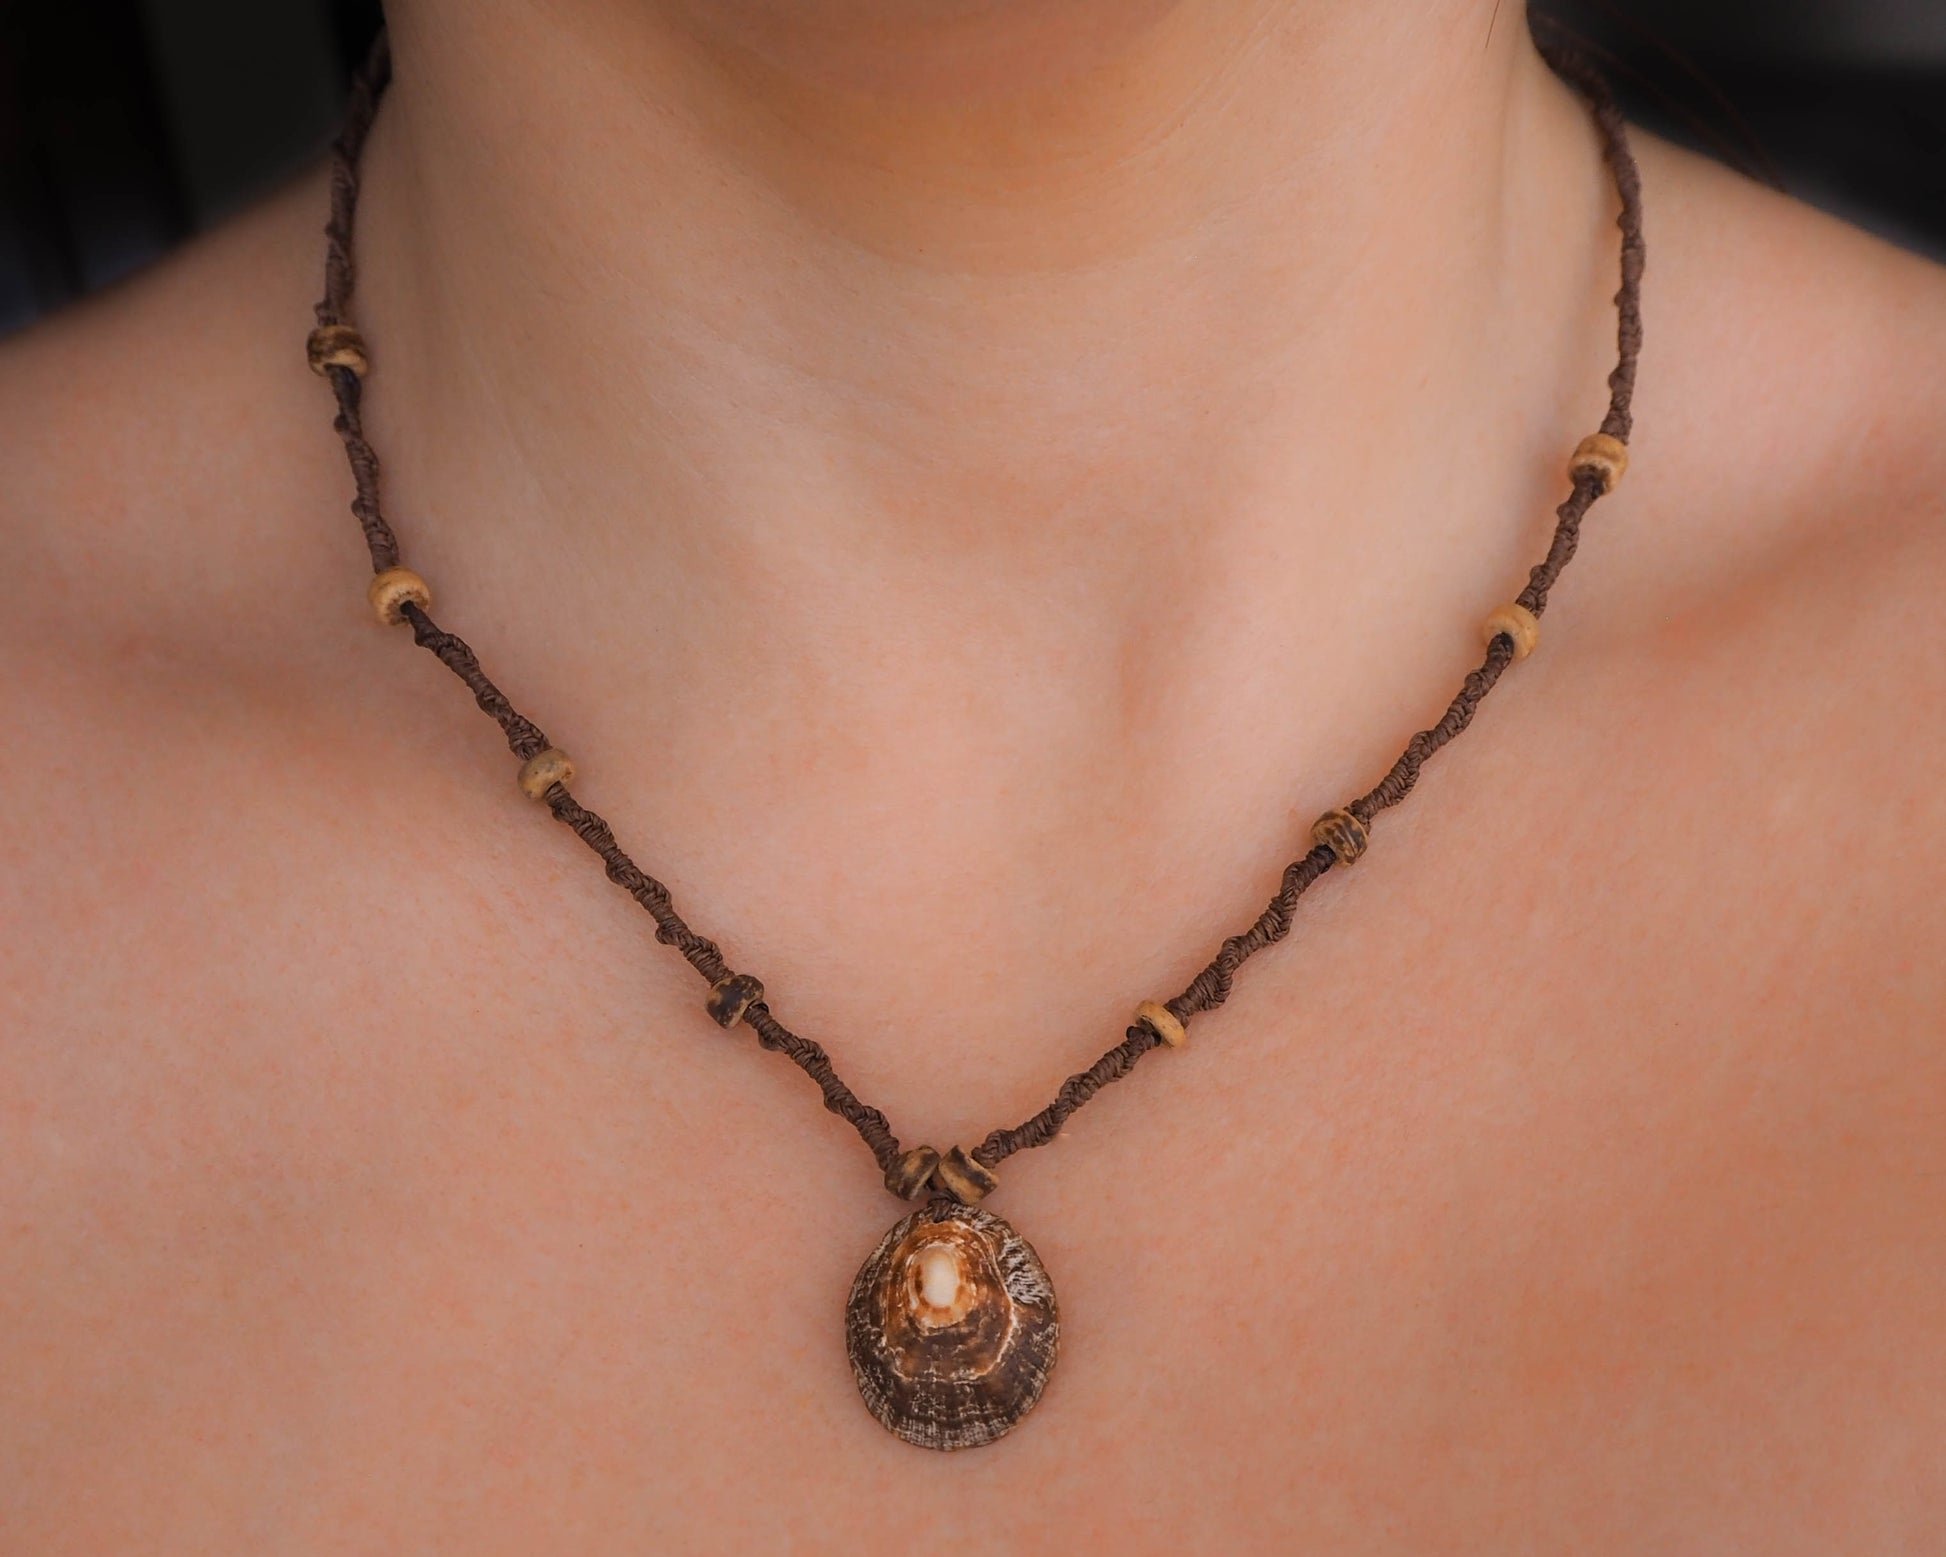 A lifestyle shot of the necklace being worn. It gracefully rests against the wearer's collarbone, the limpet shell pendant catching the light with its iridescent hues. The wooden beads add a natural and earthy touch to the ensemble.